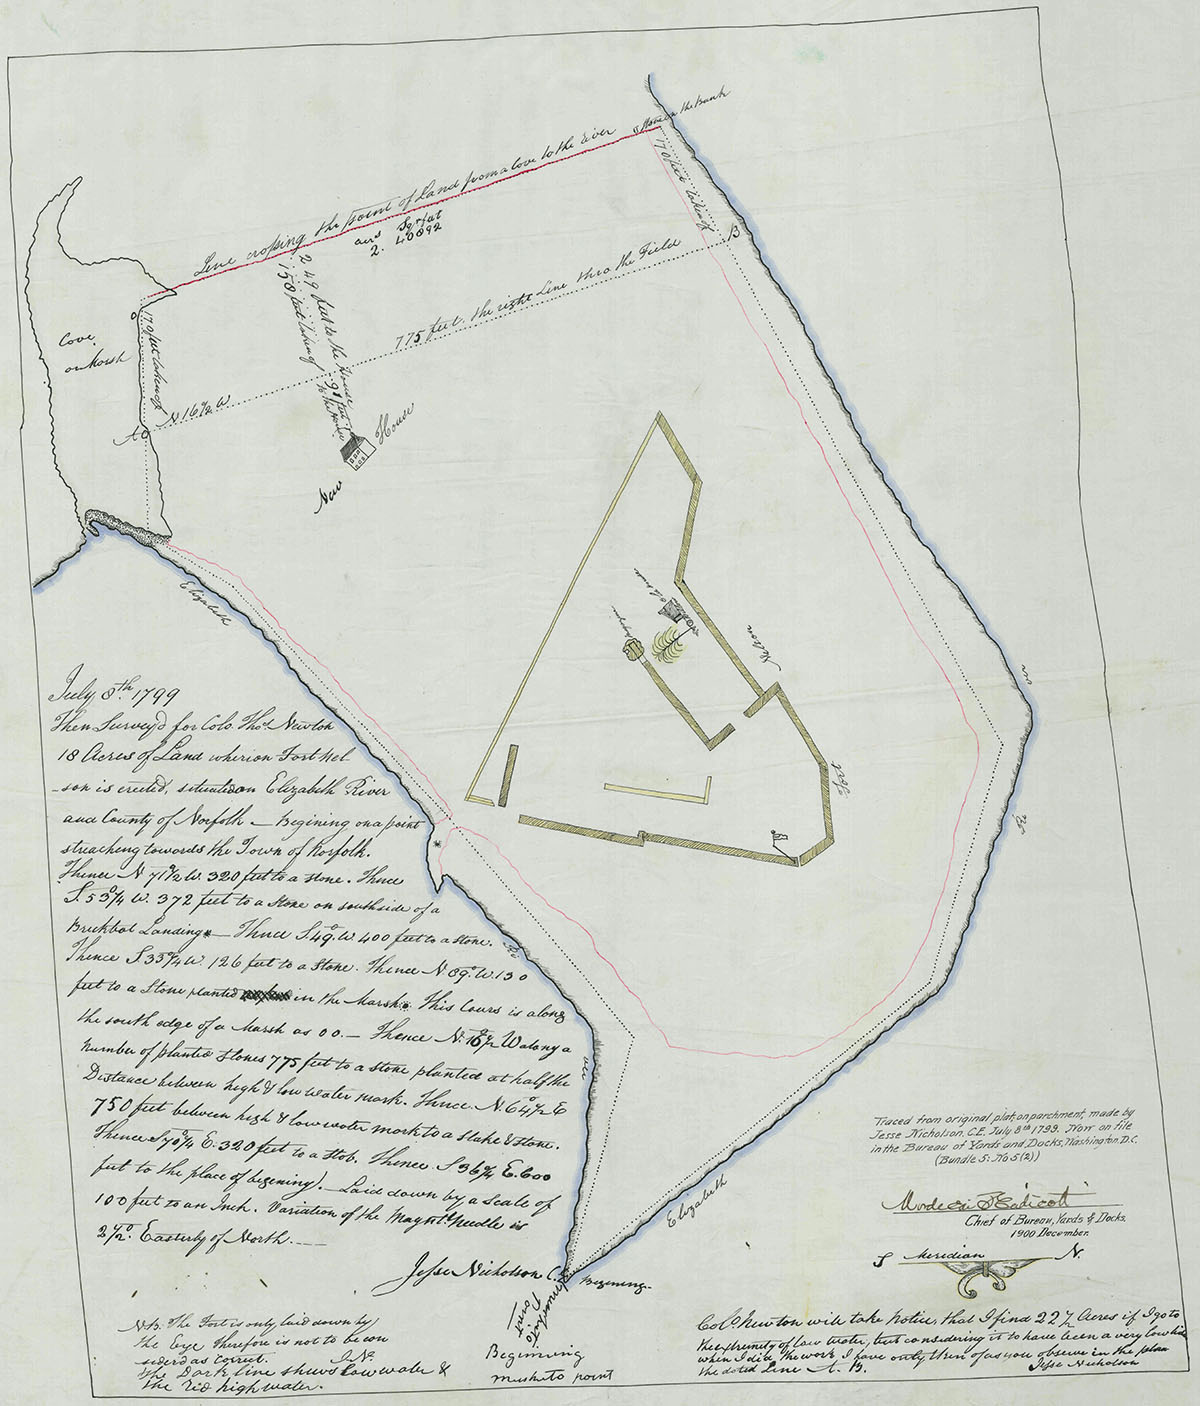  Plat of Fort Nelson July 8, 1799